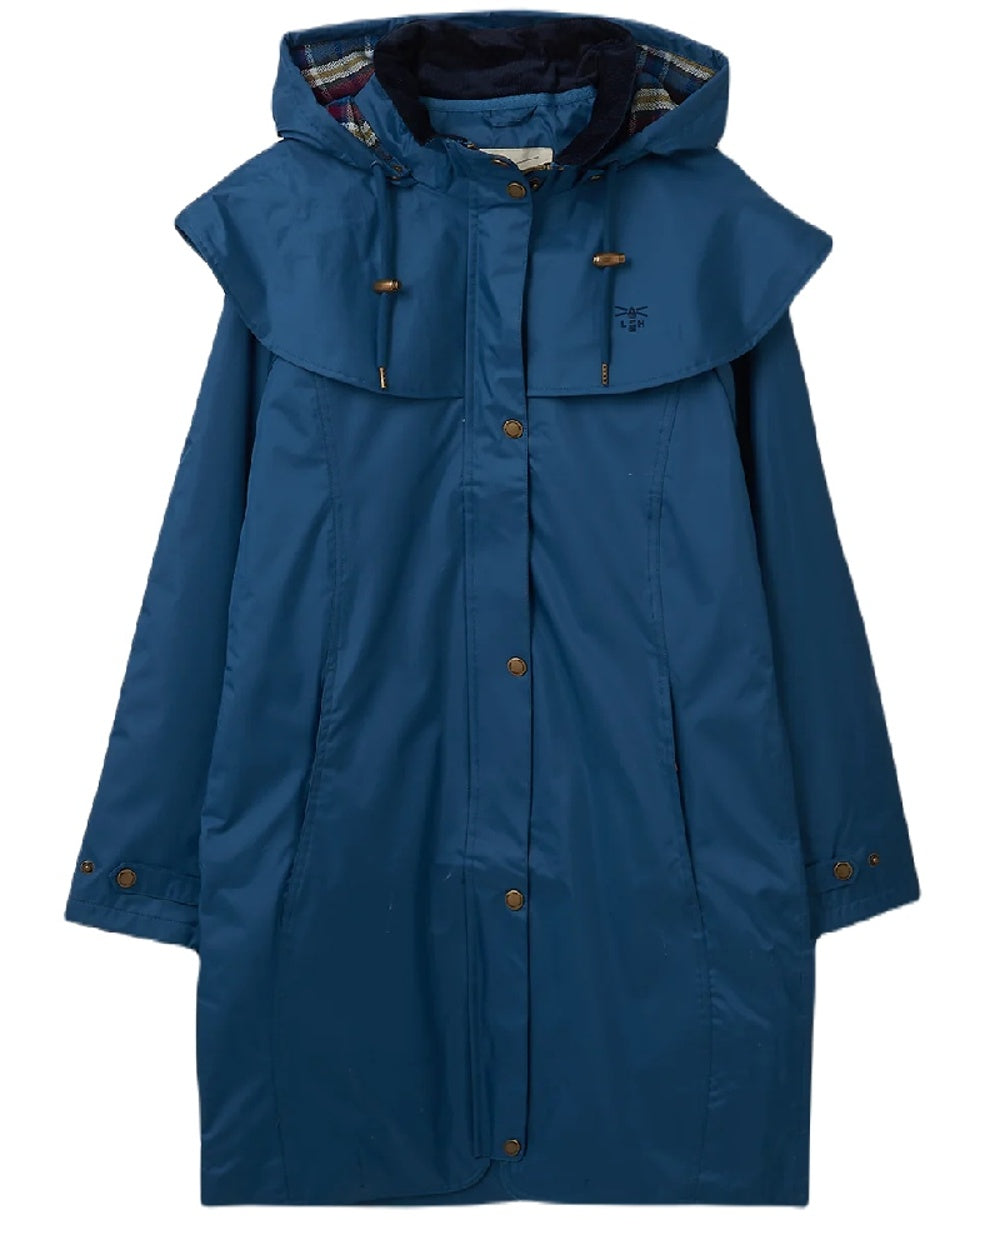 Deep Sea coloured Lighthouse Outrider 3/4 Length Ladies Waterproof Raincoat on White background 